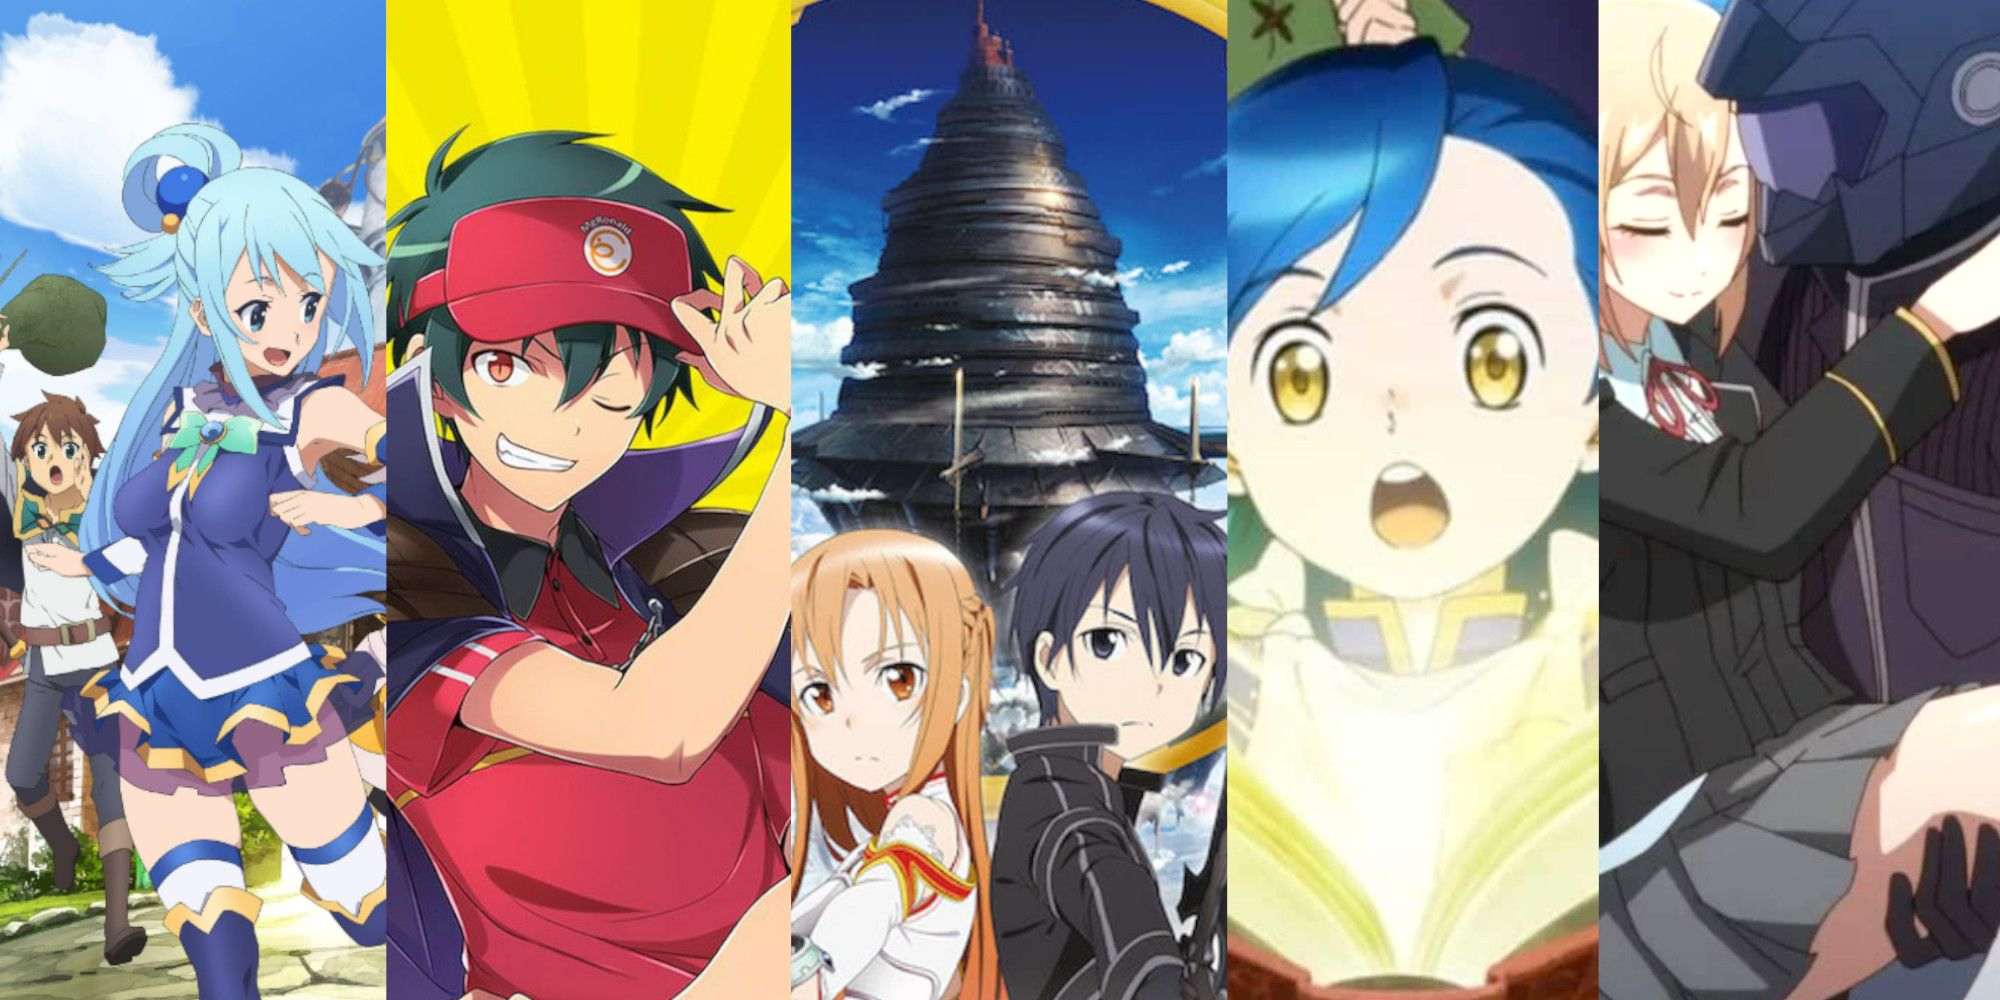 Isekai sub-genres KonoSuba, Devil is a Part-Timer, Sword Art Online, Asendance of a Bookworm, Trapped in a Dating Sim